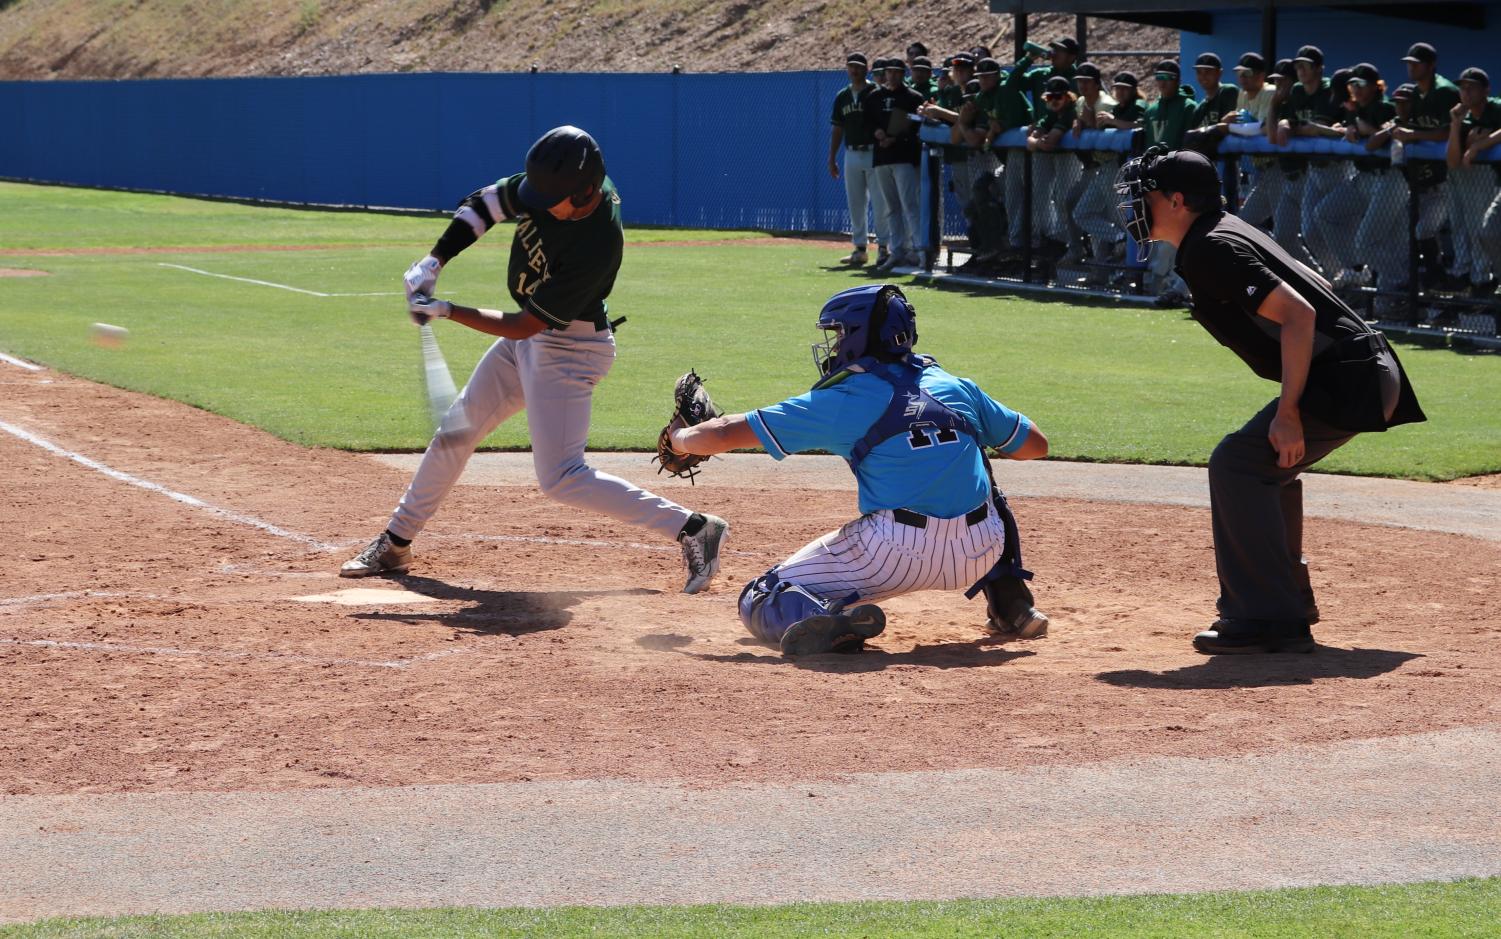 La Valley Designated hitter Jackson Lapiner swinging in his at-bat against the raiders on April 12, 2022, at Moorpark College.